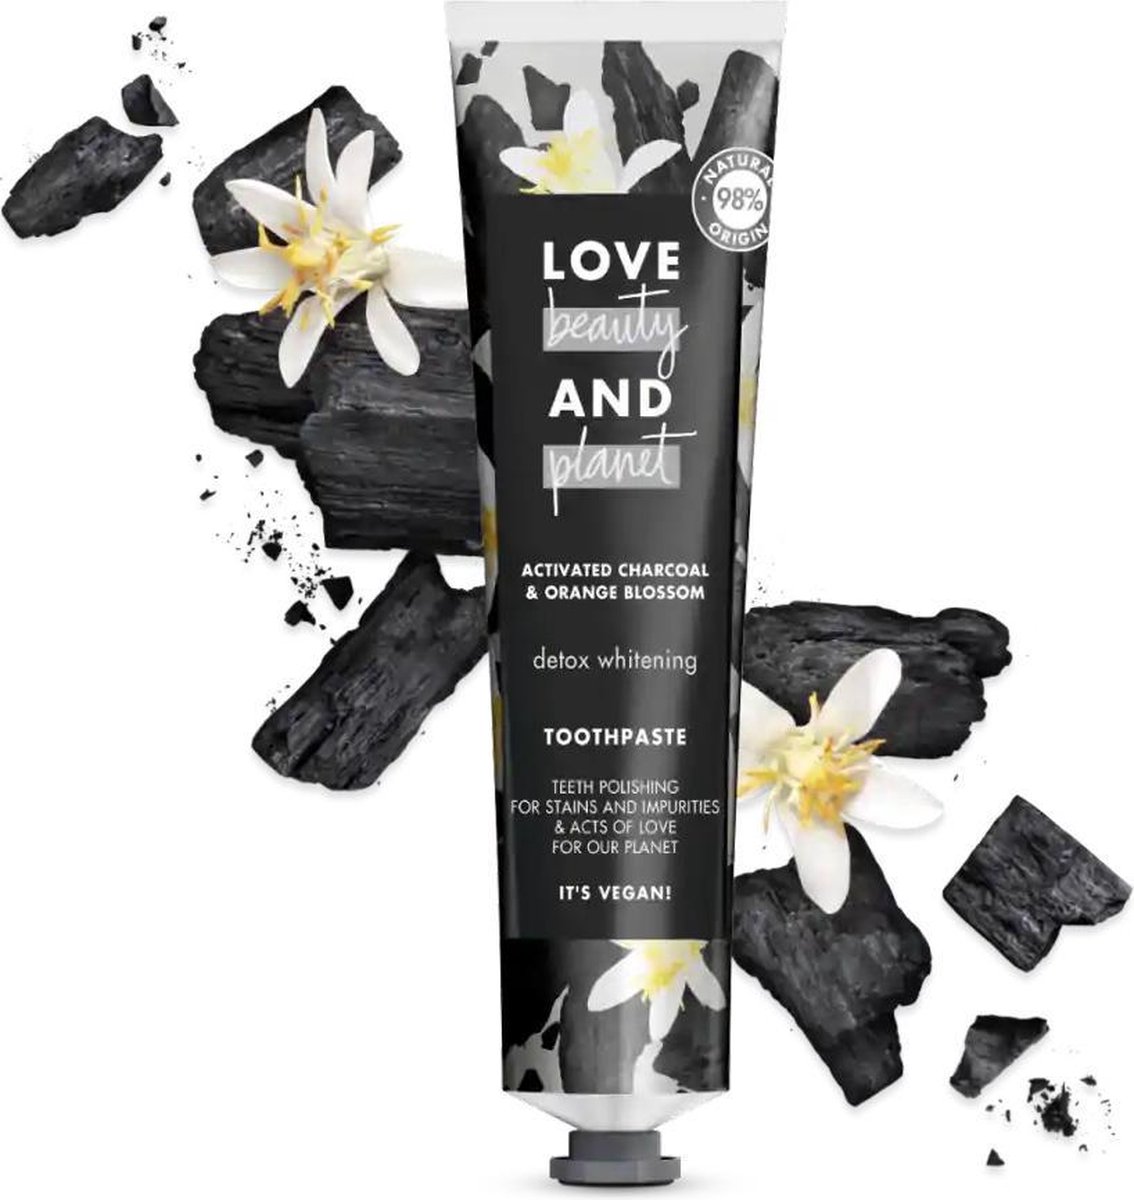 Love Beauty And Planet - Activated Charcoal & Orange Blossom Toothpaste - Toothpaste With Activated Charcoal And Orange Blossom